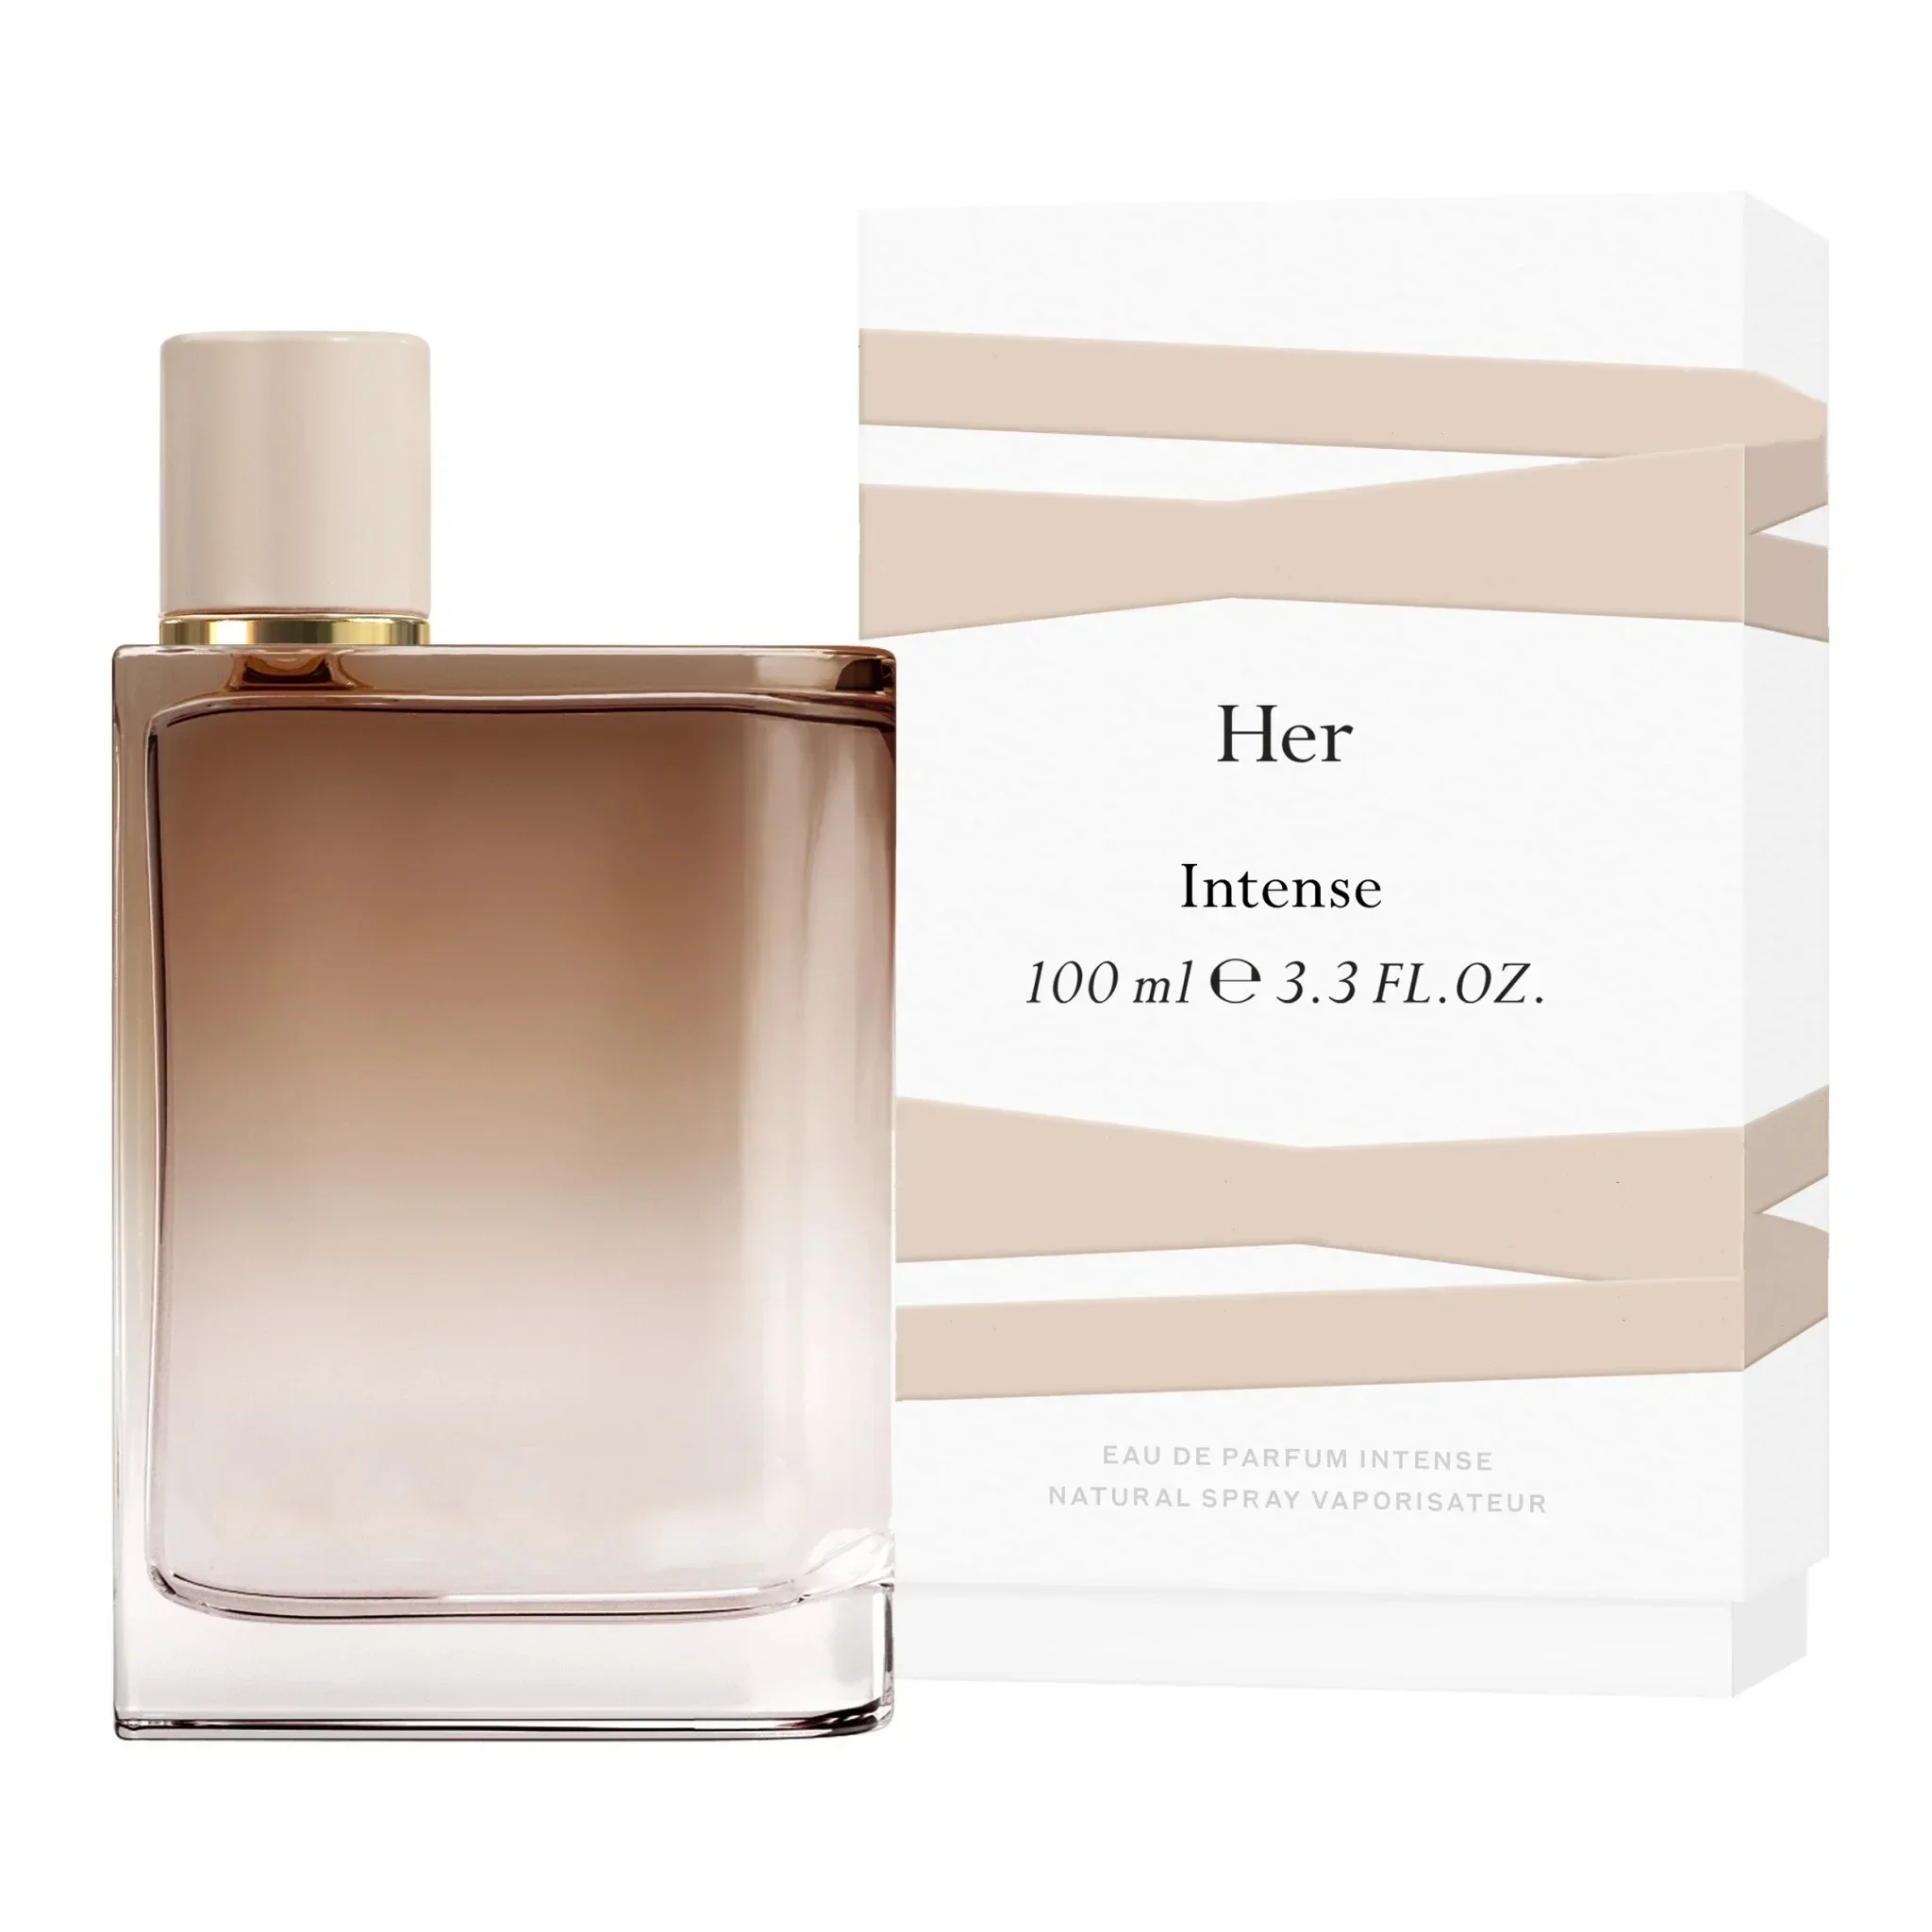 

Her Intense Lady Spray Good Smell Floral Smell Date Spray Holiday Gift Intoxicating Fragrance for Women